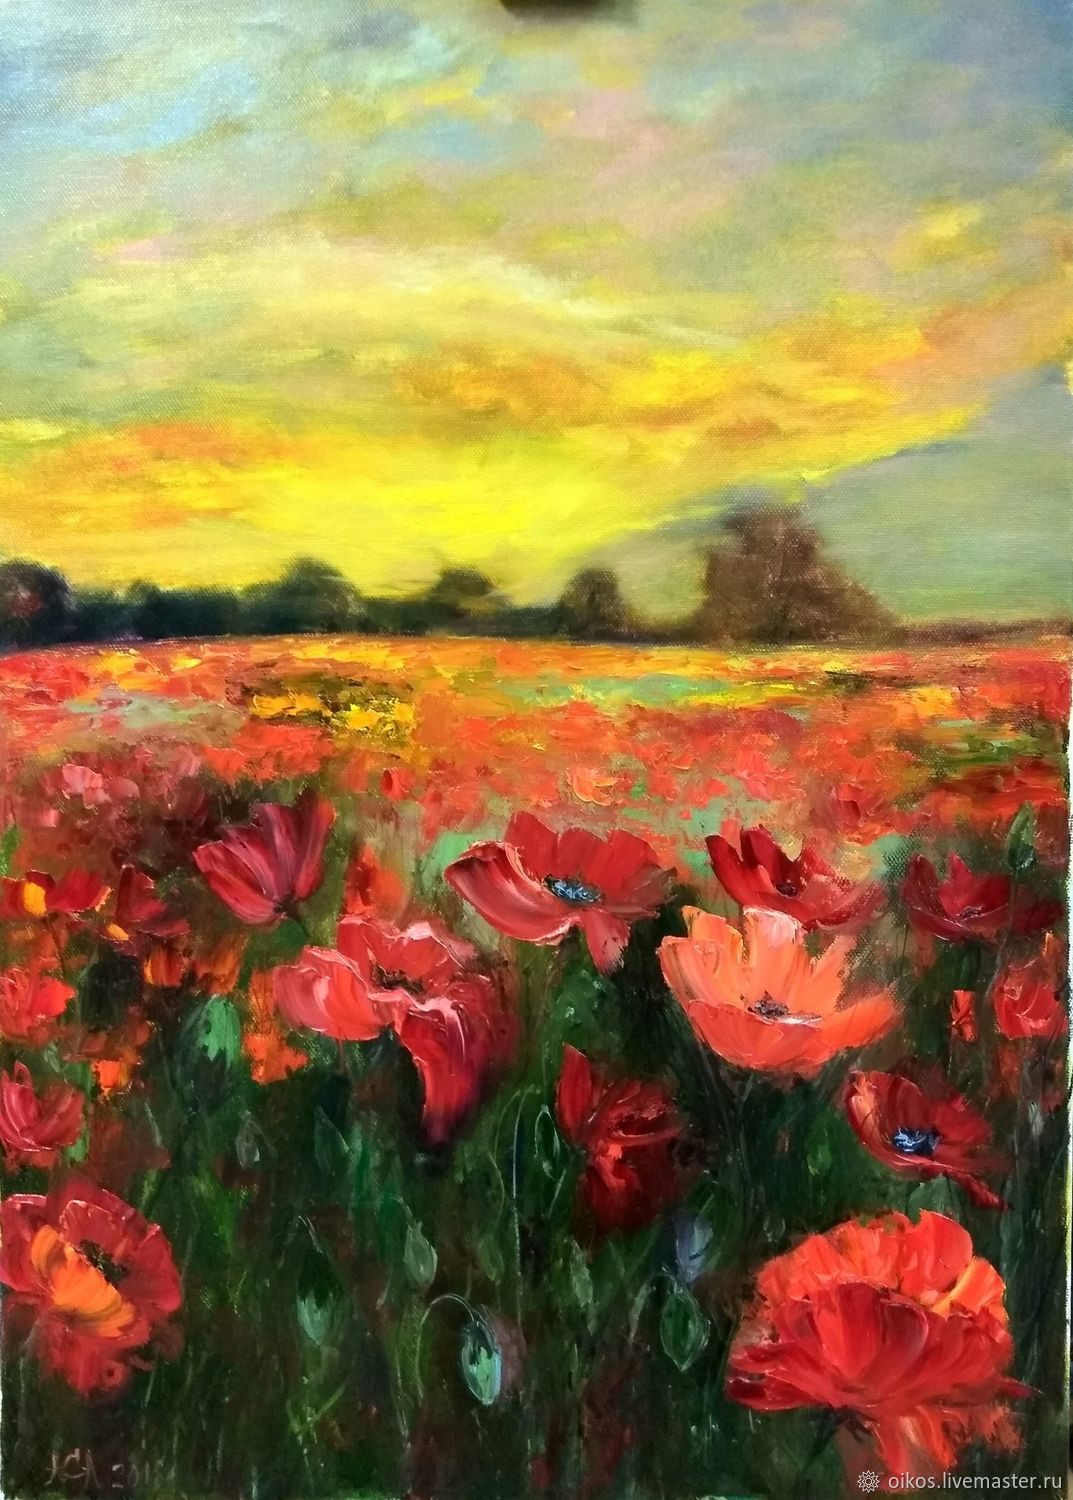 Landscape Paintings On Canvas
 Field with poppies summer landscape oil painting on canvas